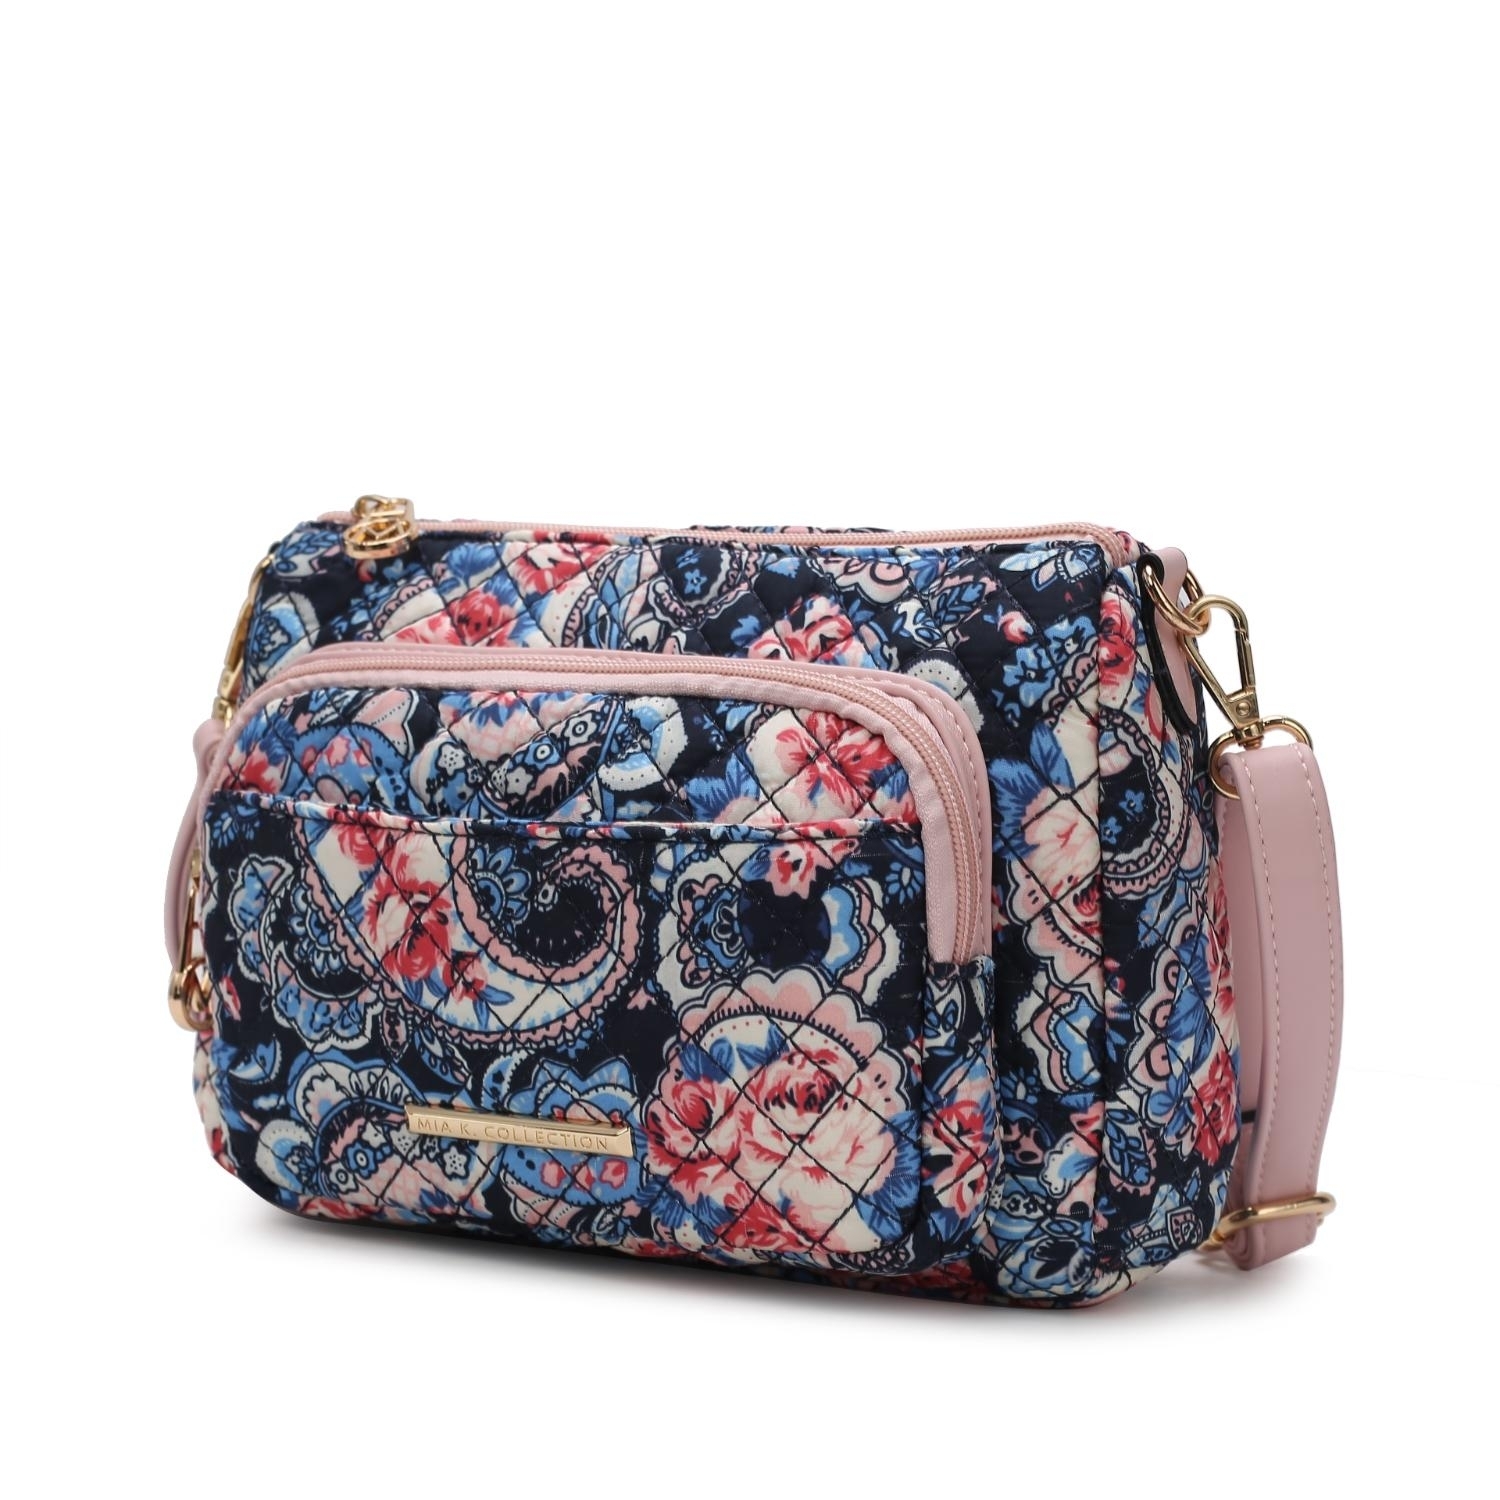 MKF Collection Rosalie Quilted Cotton Botanical Pattern Women's Shoulder Bag By Mia K - Blue